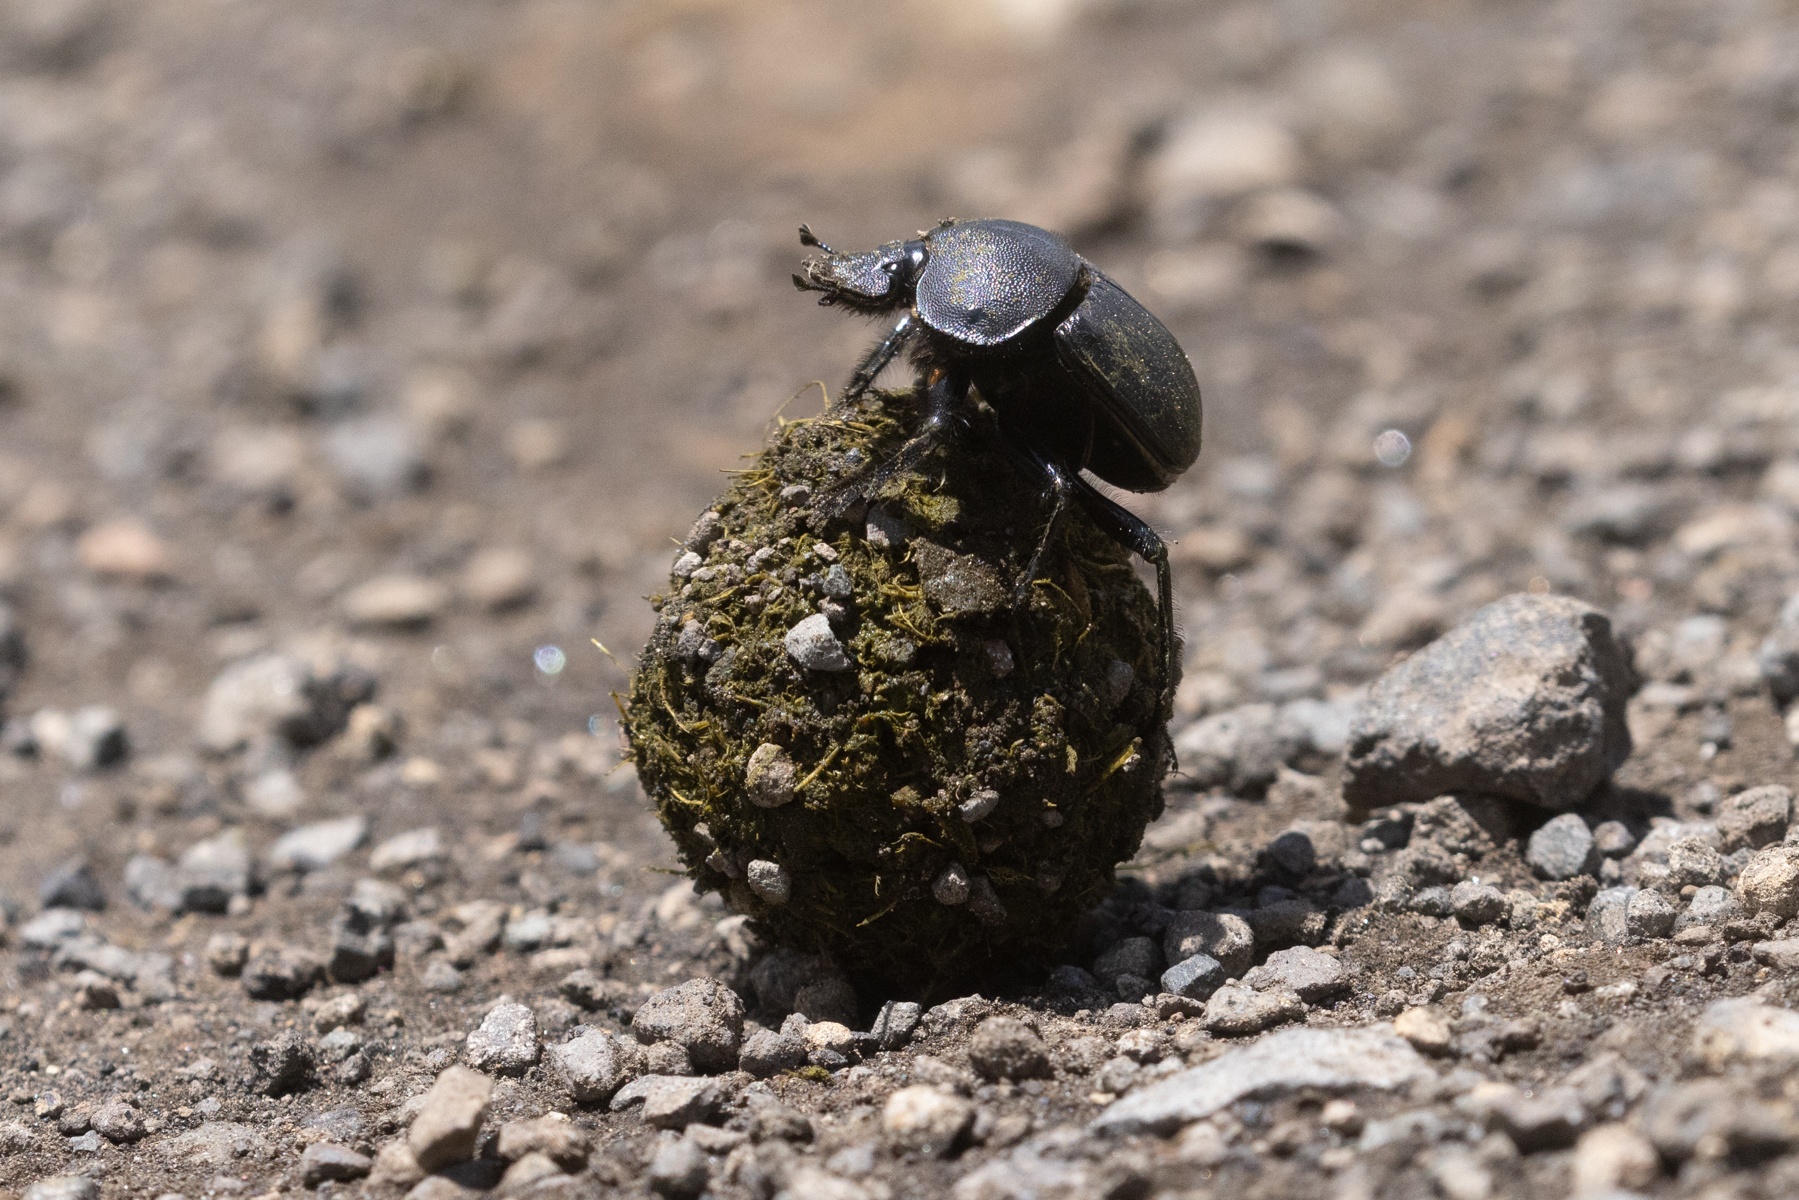 And yes, we even stop to photograph dung beetles rolling dung on our safaris!